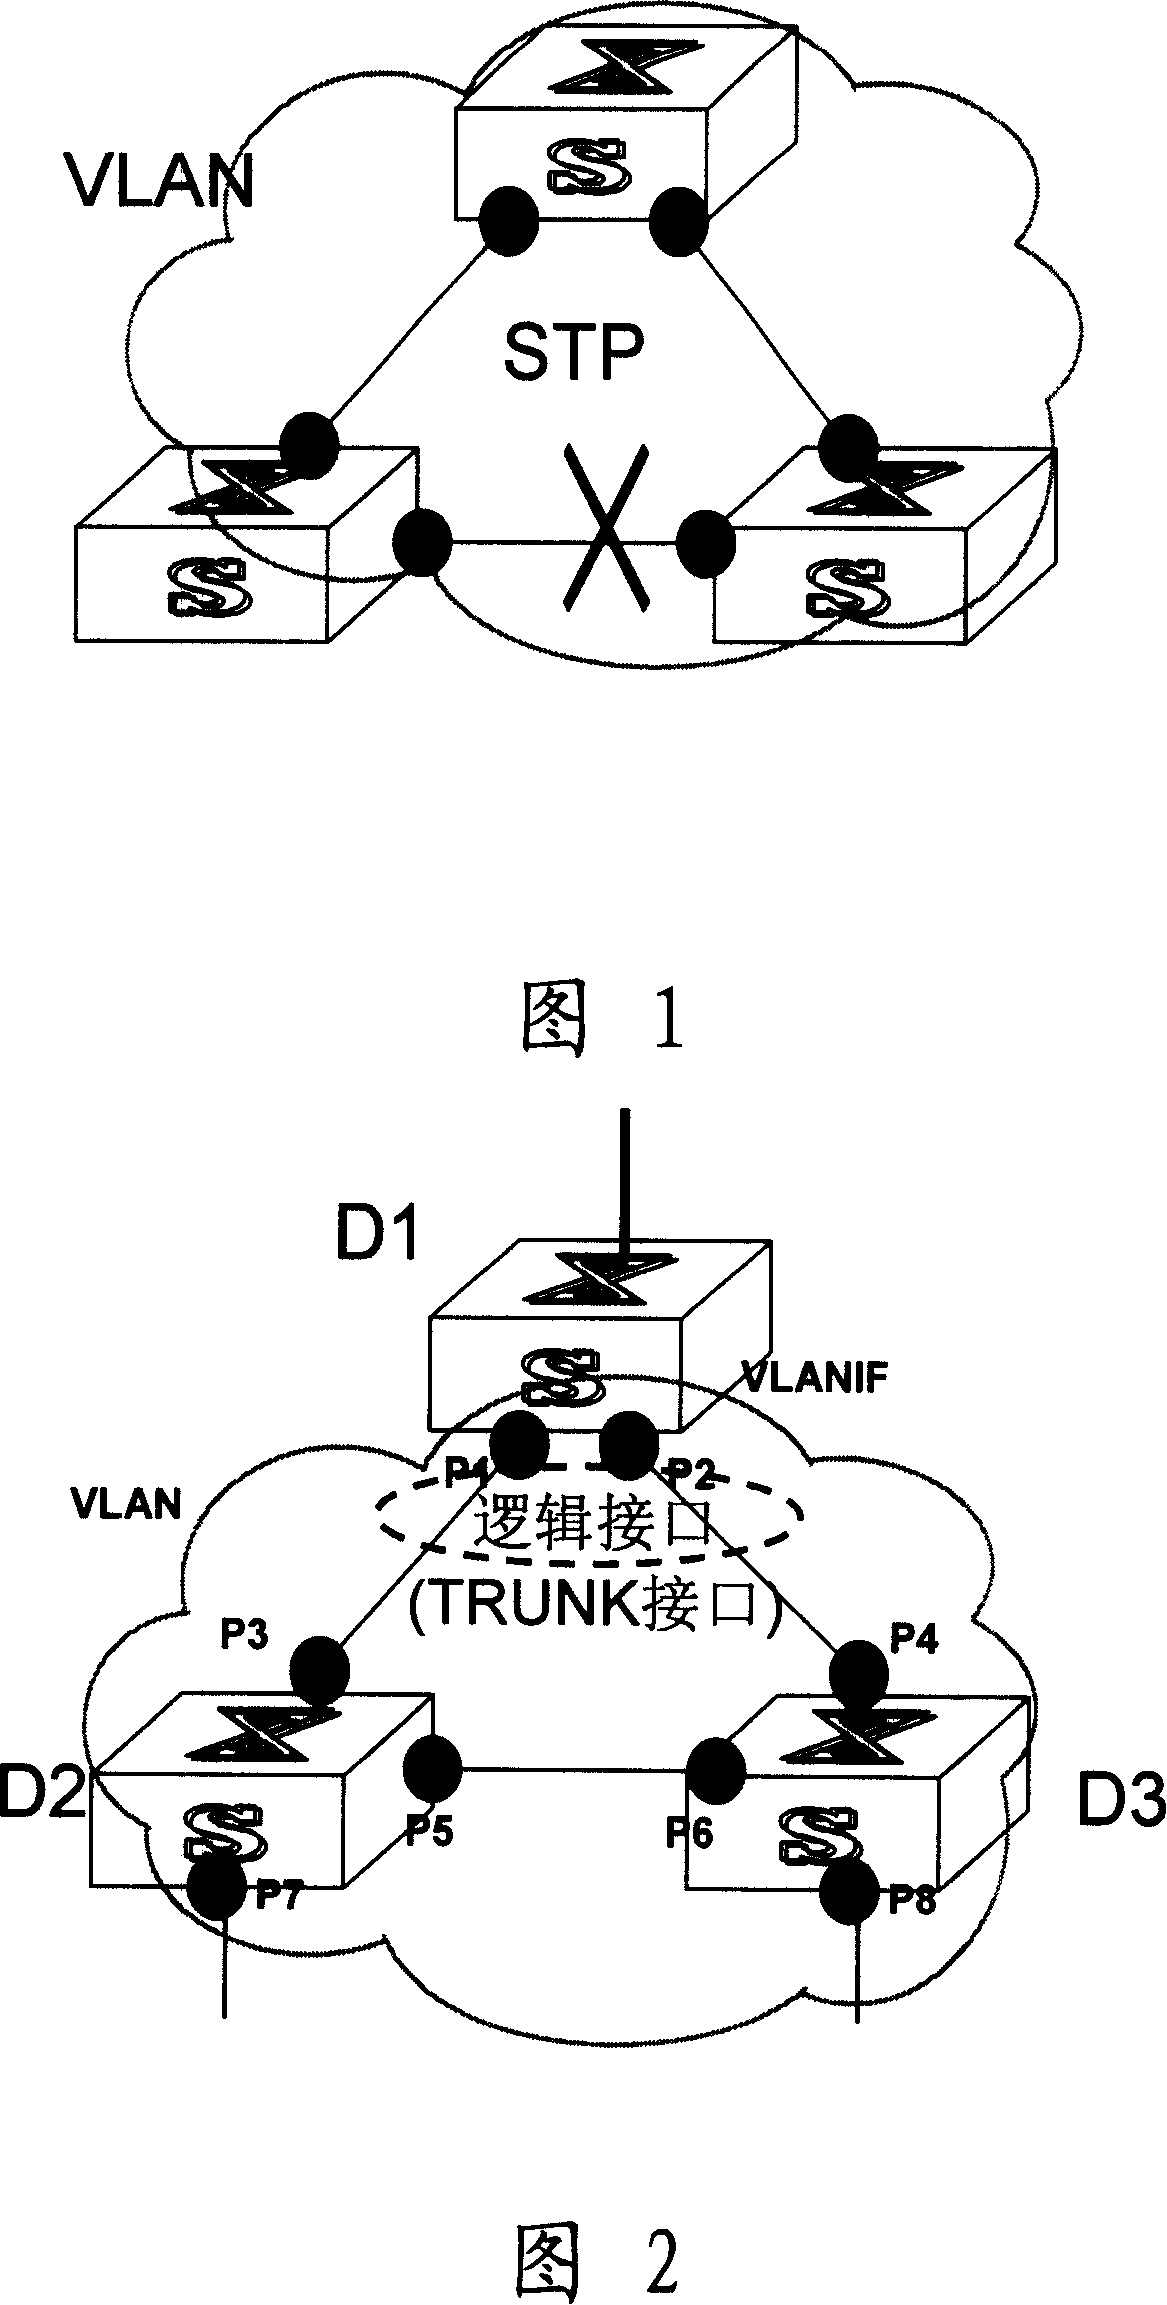 Ethernet switching system and equipment